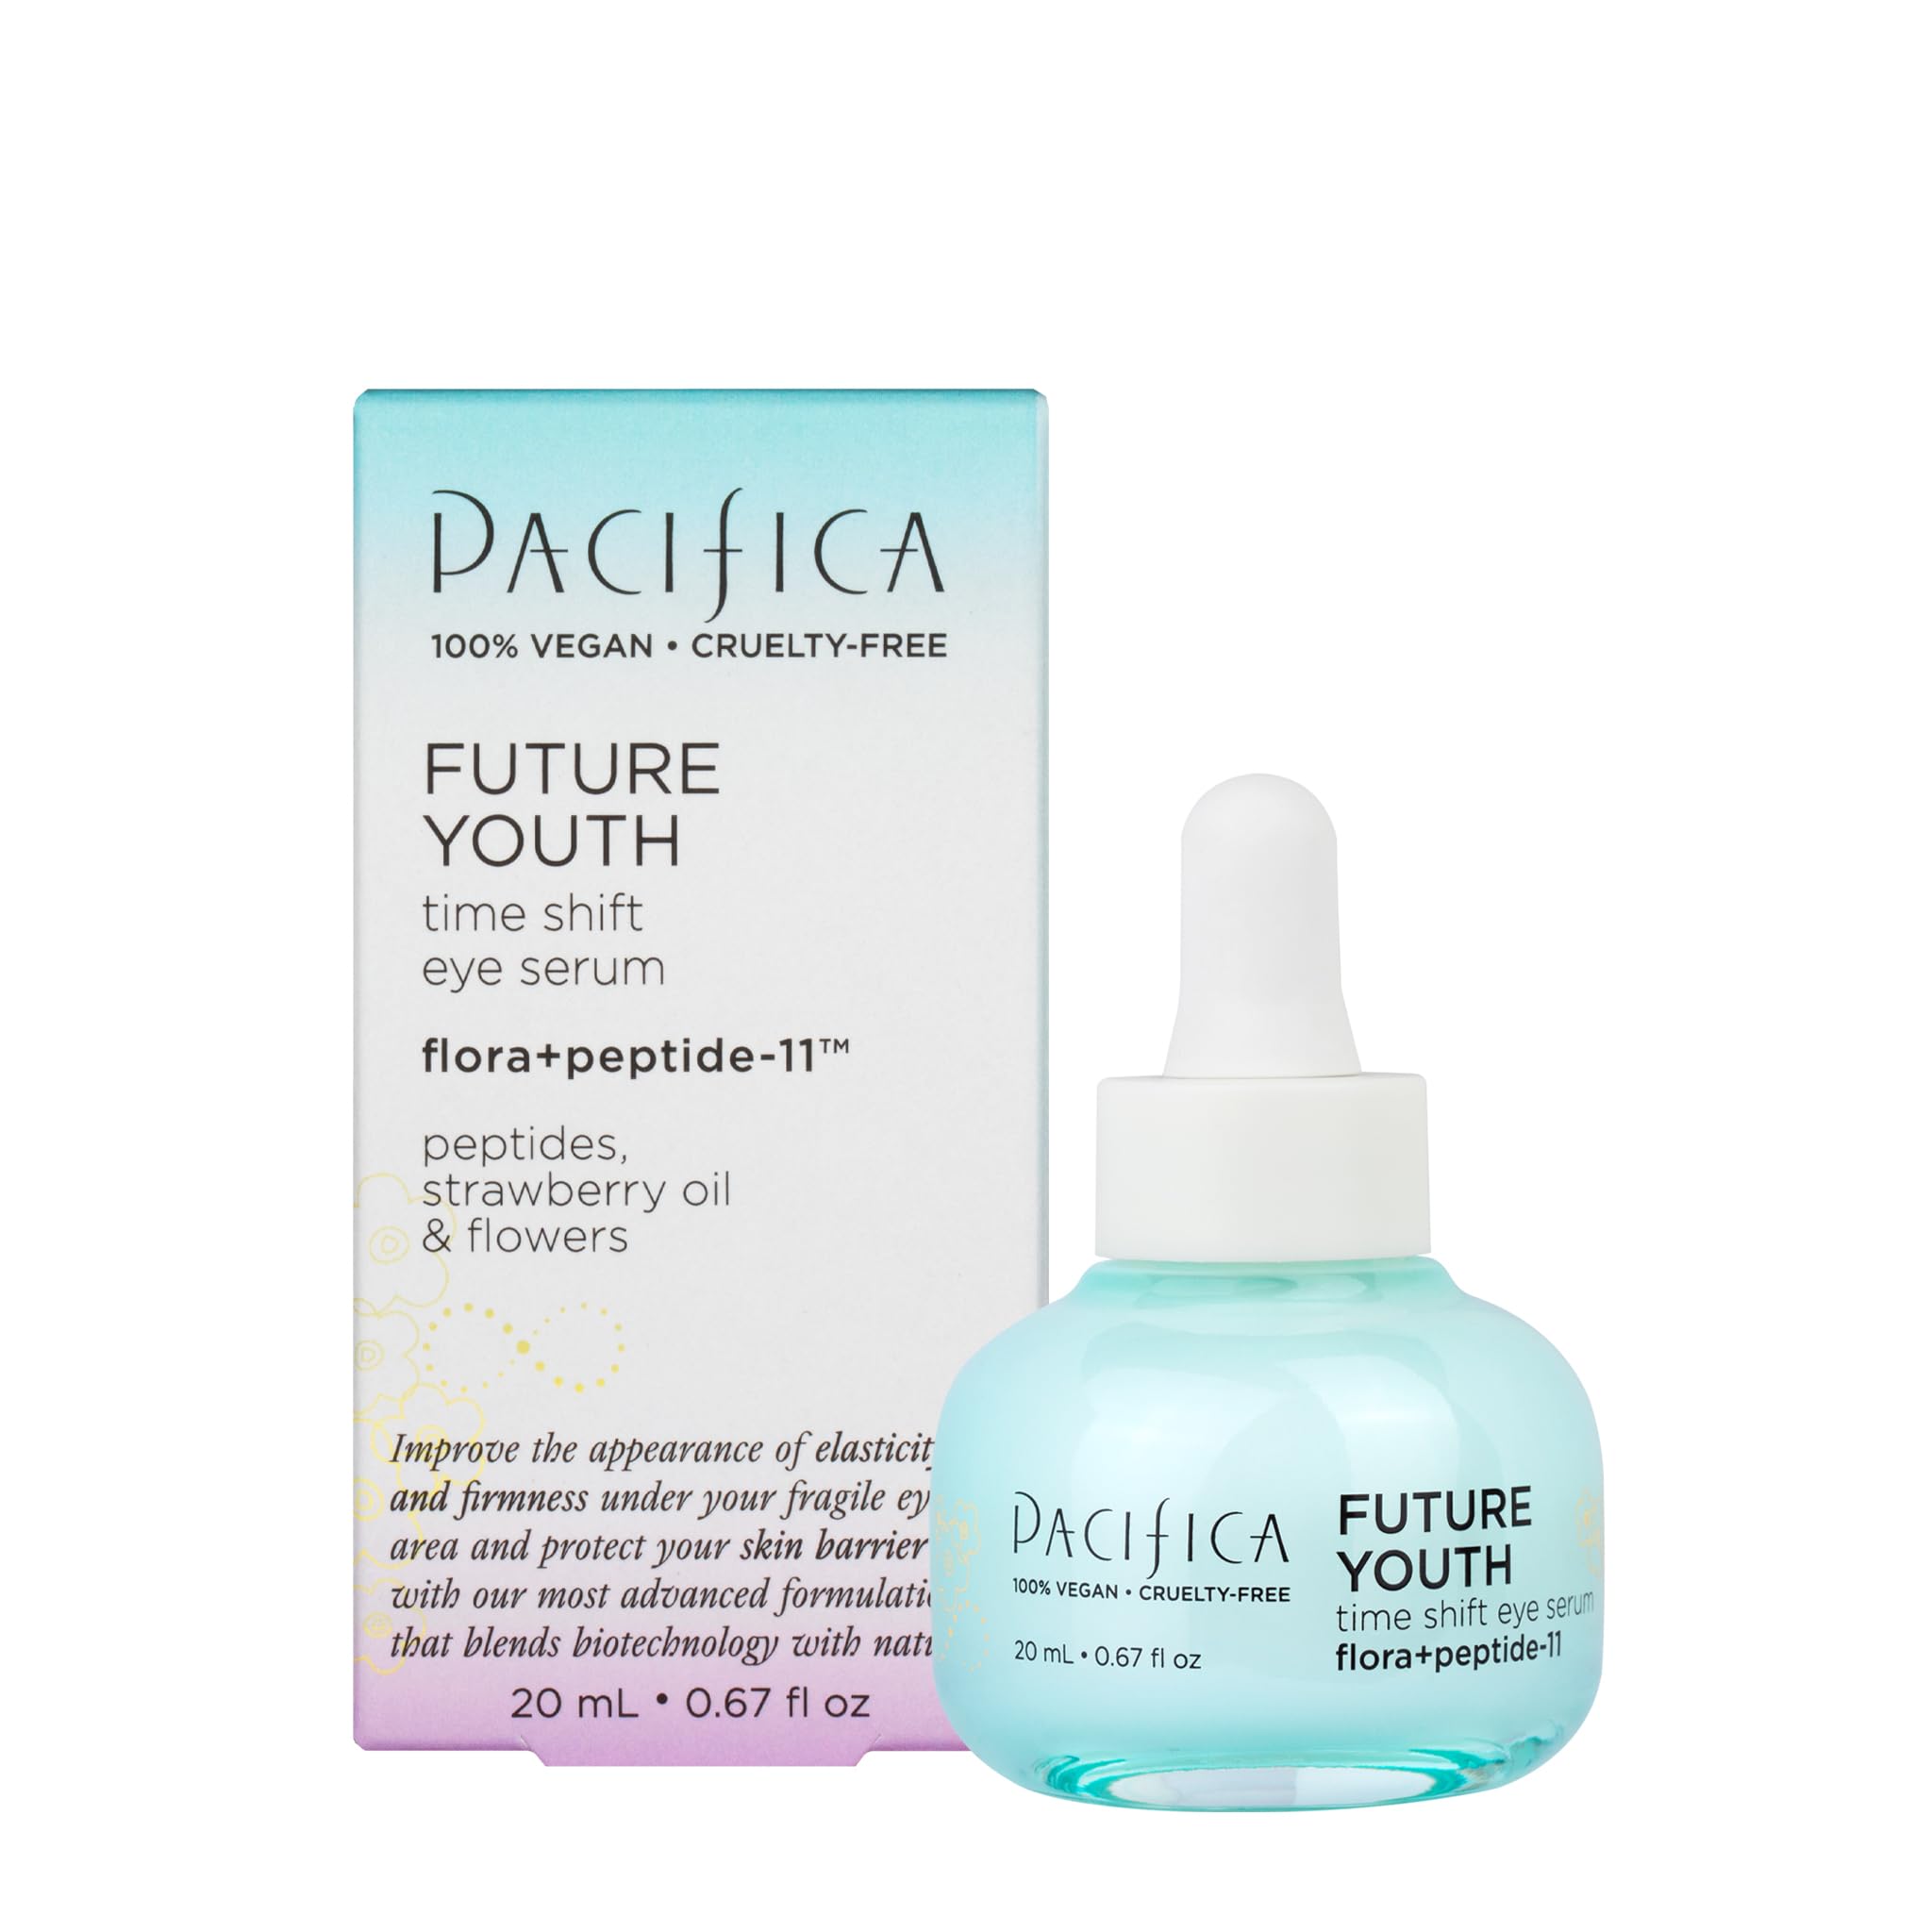 Pacifica Beauty, Future Youth Time Shift Eye Serum, Brighten Dark Circles, Improve Fine Lines, Lightweight, Fragrance Free, Hydrating, Youthful Skin, Firming, Vegan, Cruelty Free